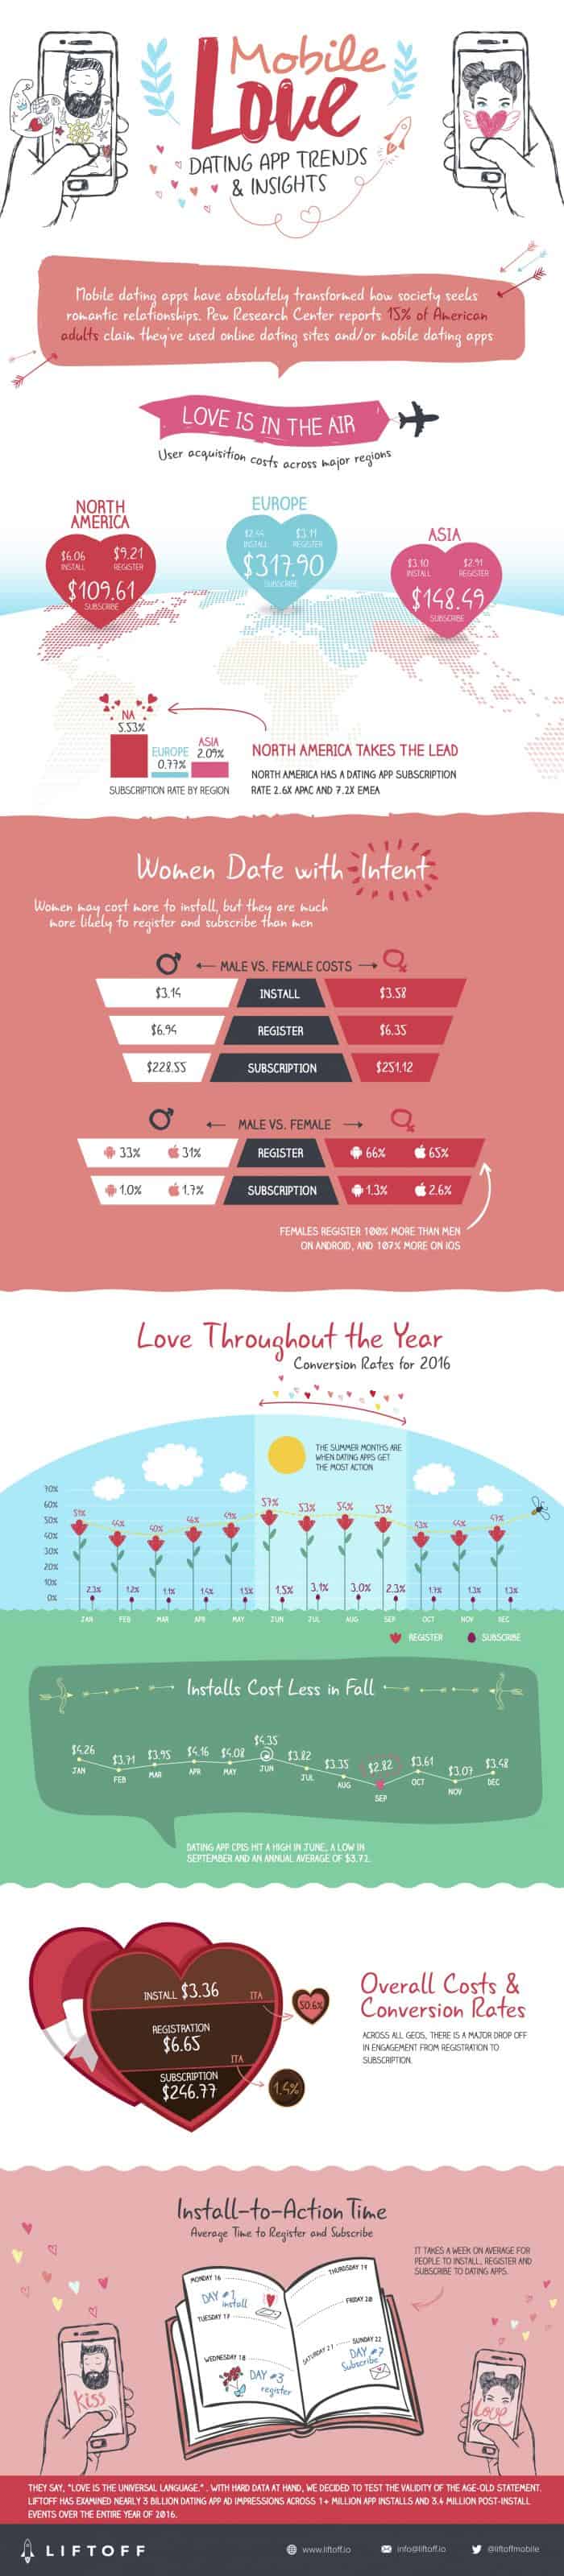 Mobile Love Dating App Trends and Insights